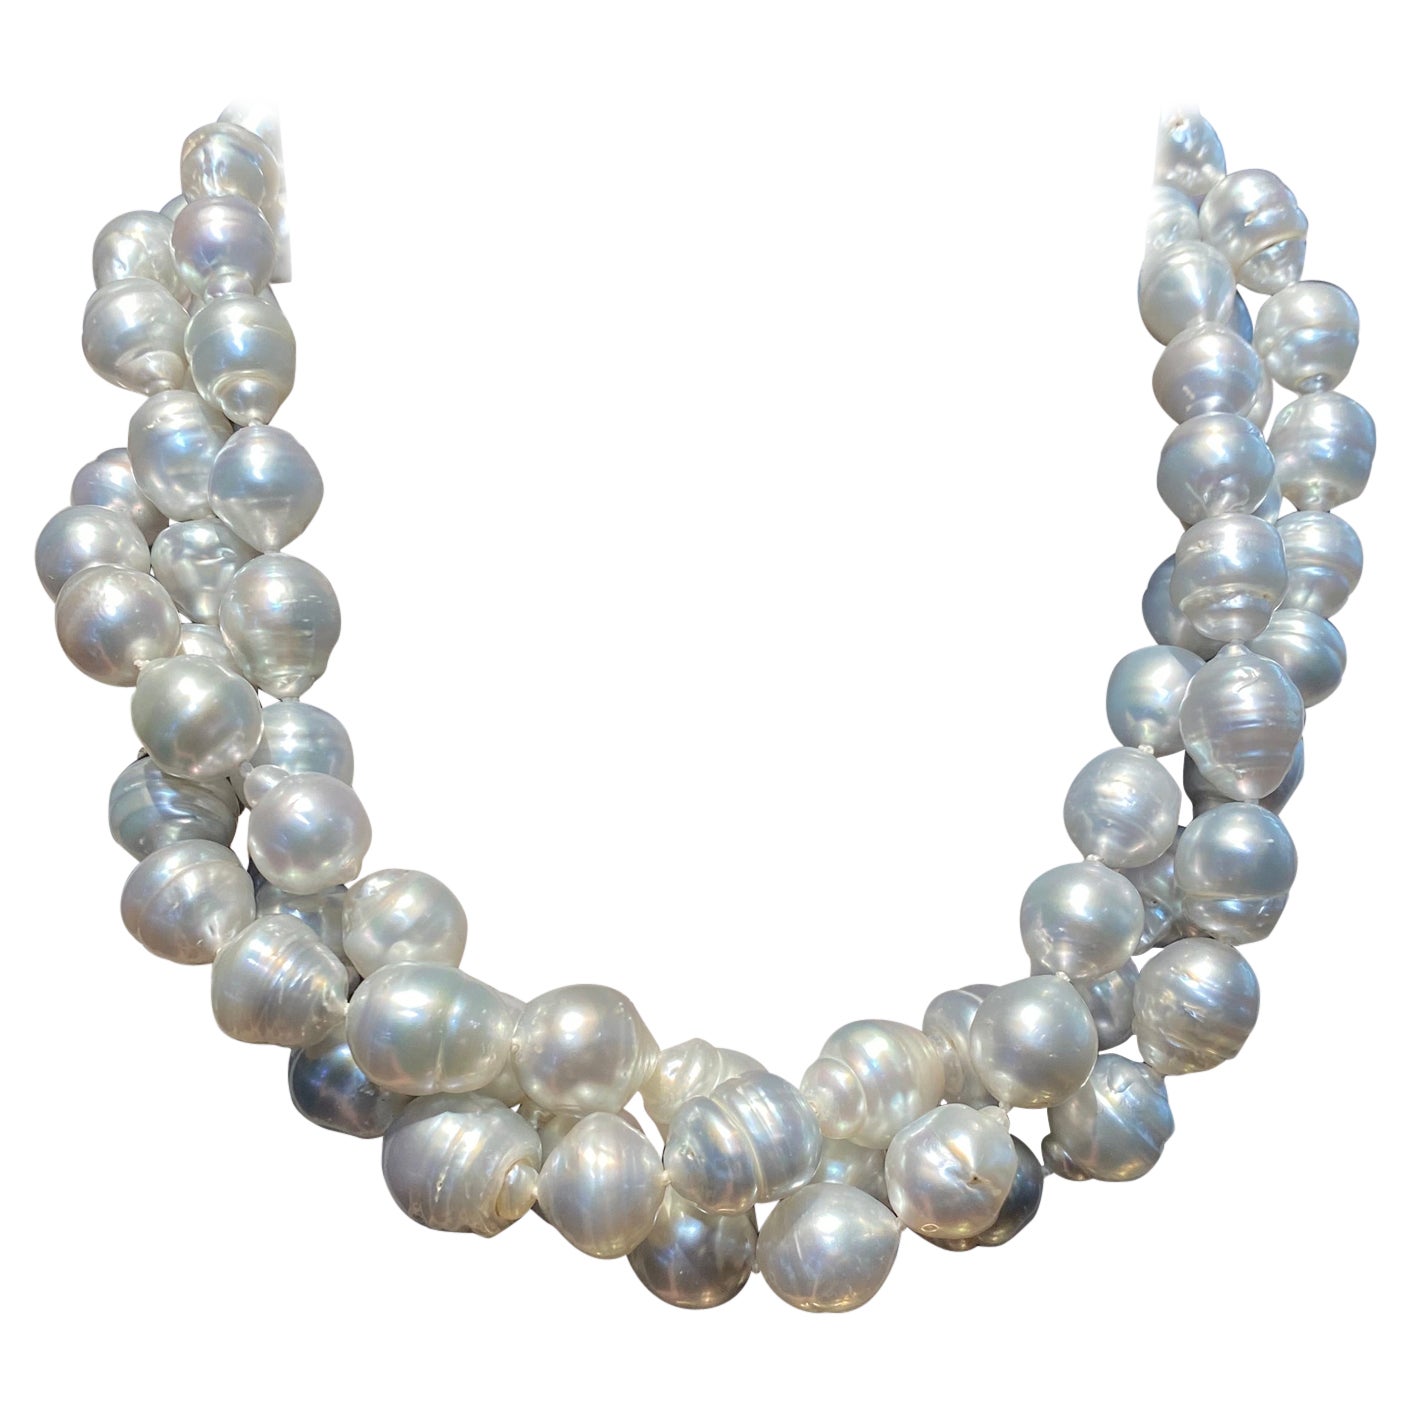 Eostre 3 Australian South Sea Pearl Strands Necklace with Diamond Clasp